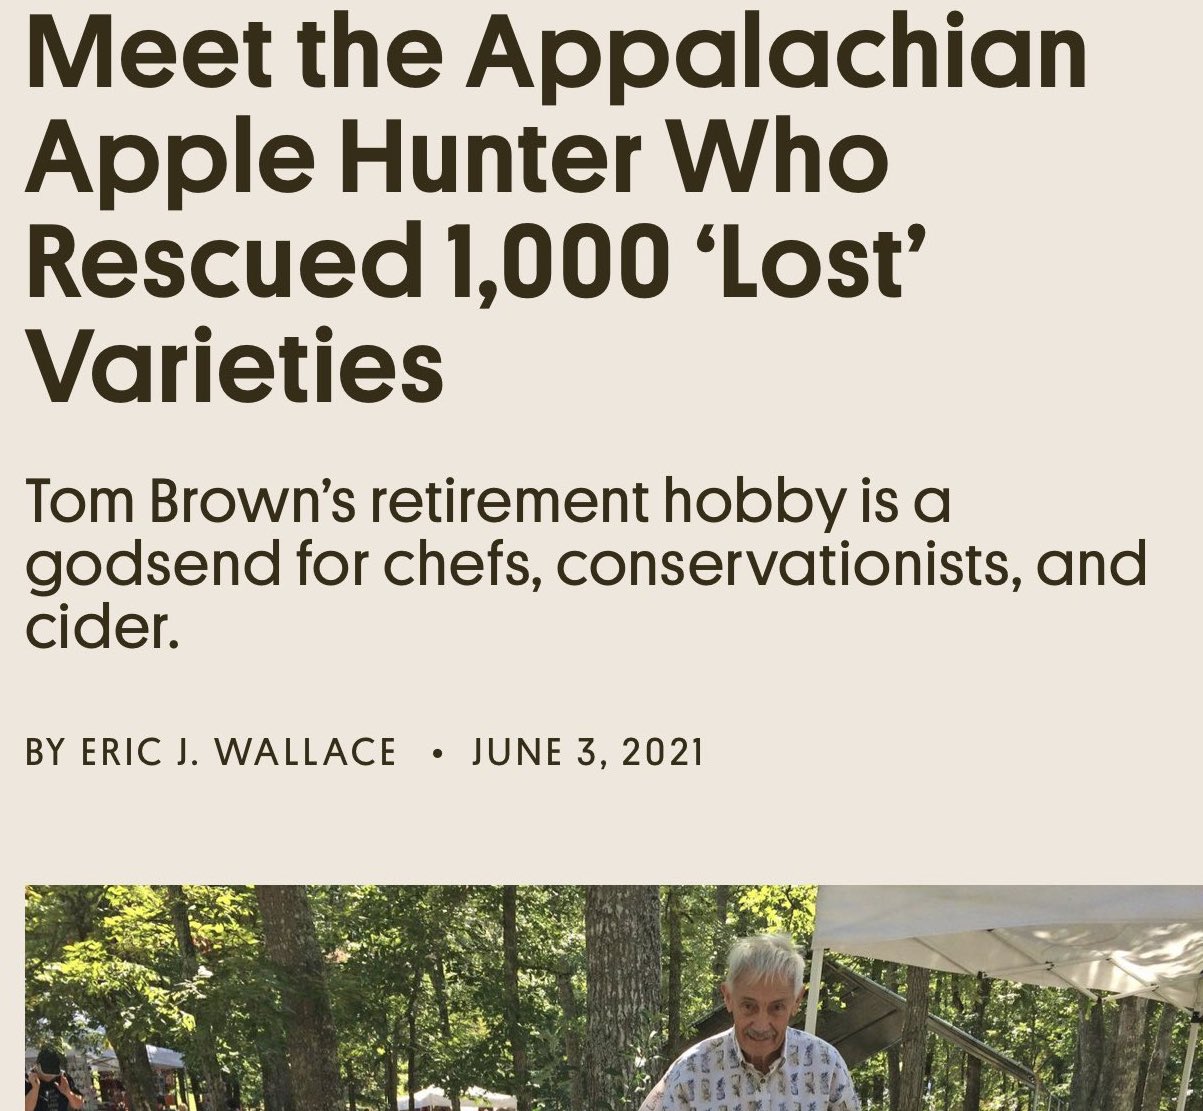 Dudes posting their wins - tree - Meet the Appalachian Apple Hunter Who Rescued 1,000 'Lost' Varieties Tom Brown's retirement hobby is a godsend for chefs, conservationists, and cider. By Eric J. Wallace